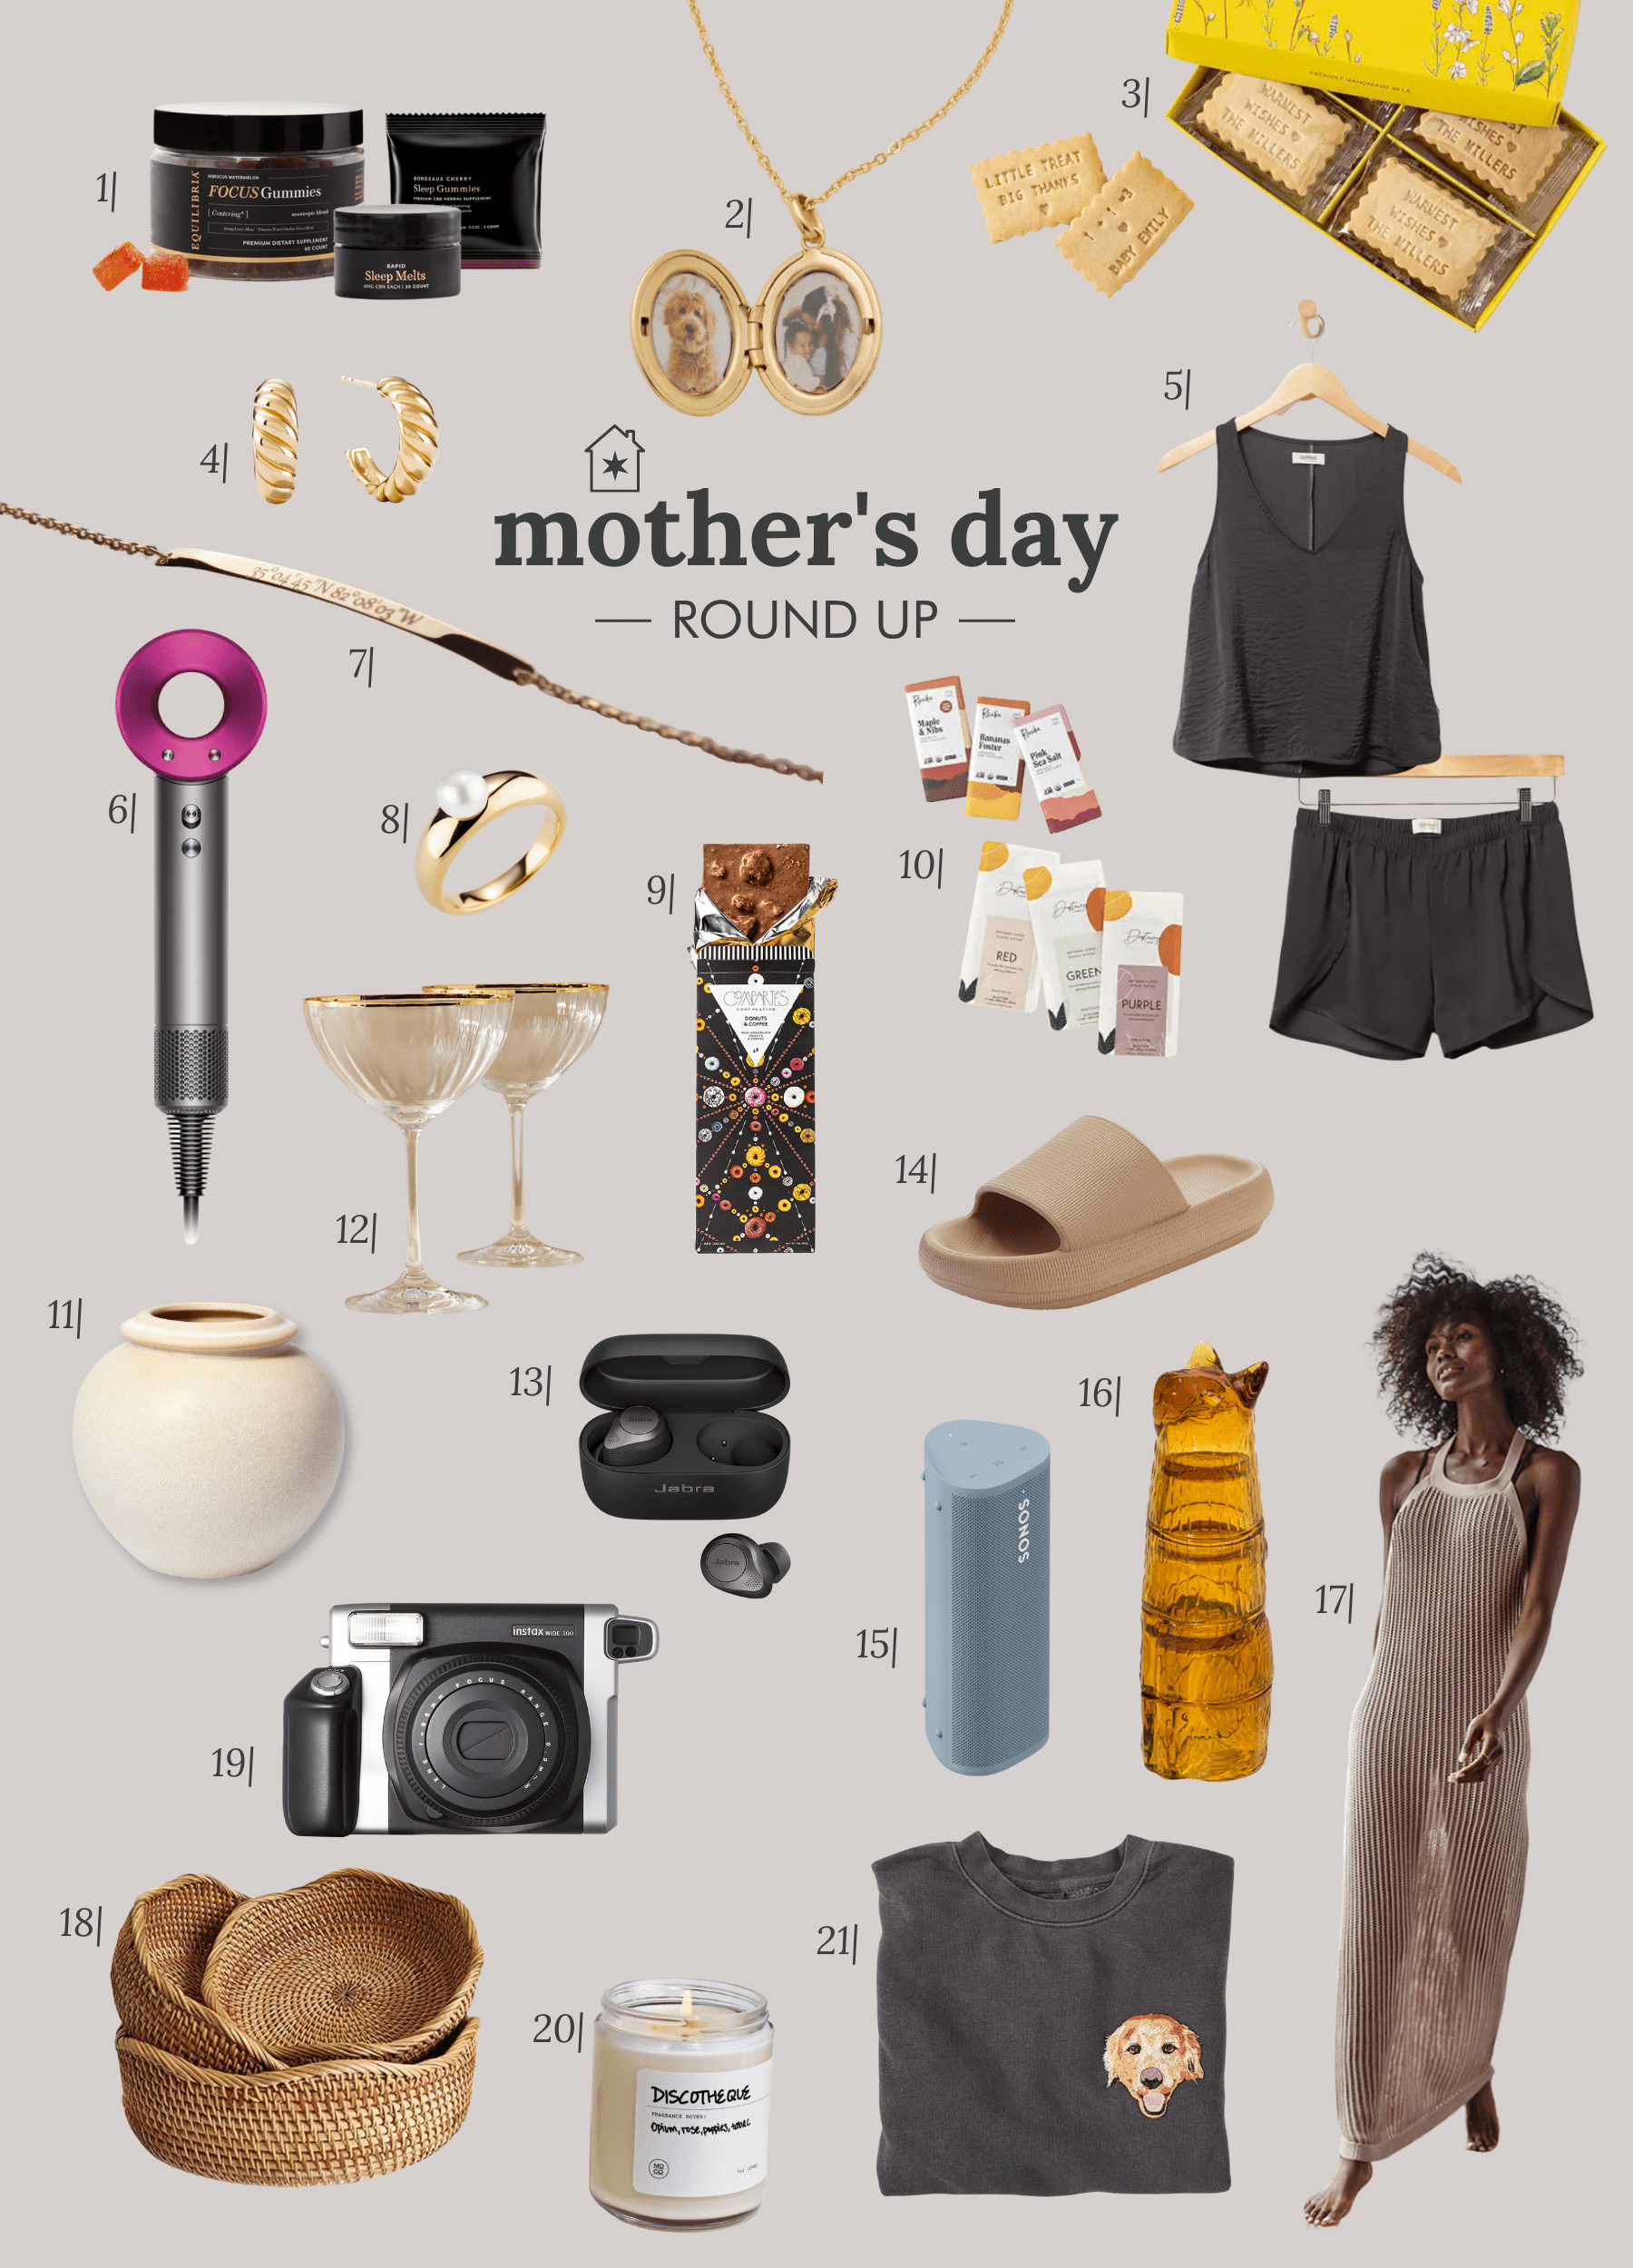 Mother's Day gift ideas for stylish and young moms